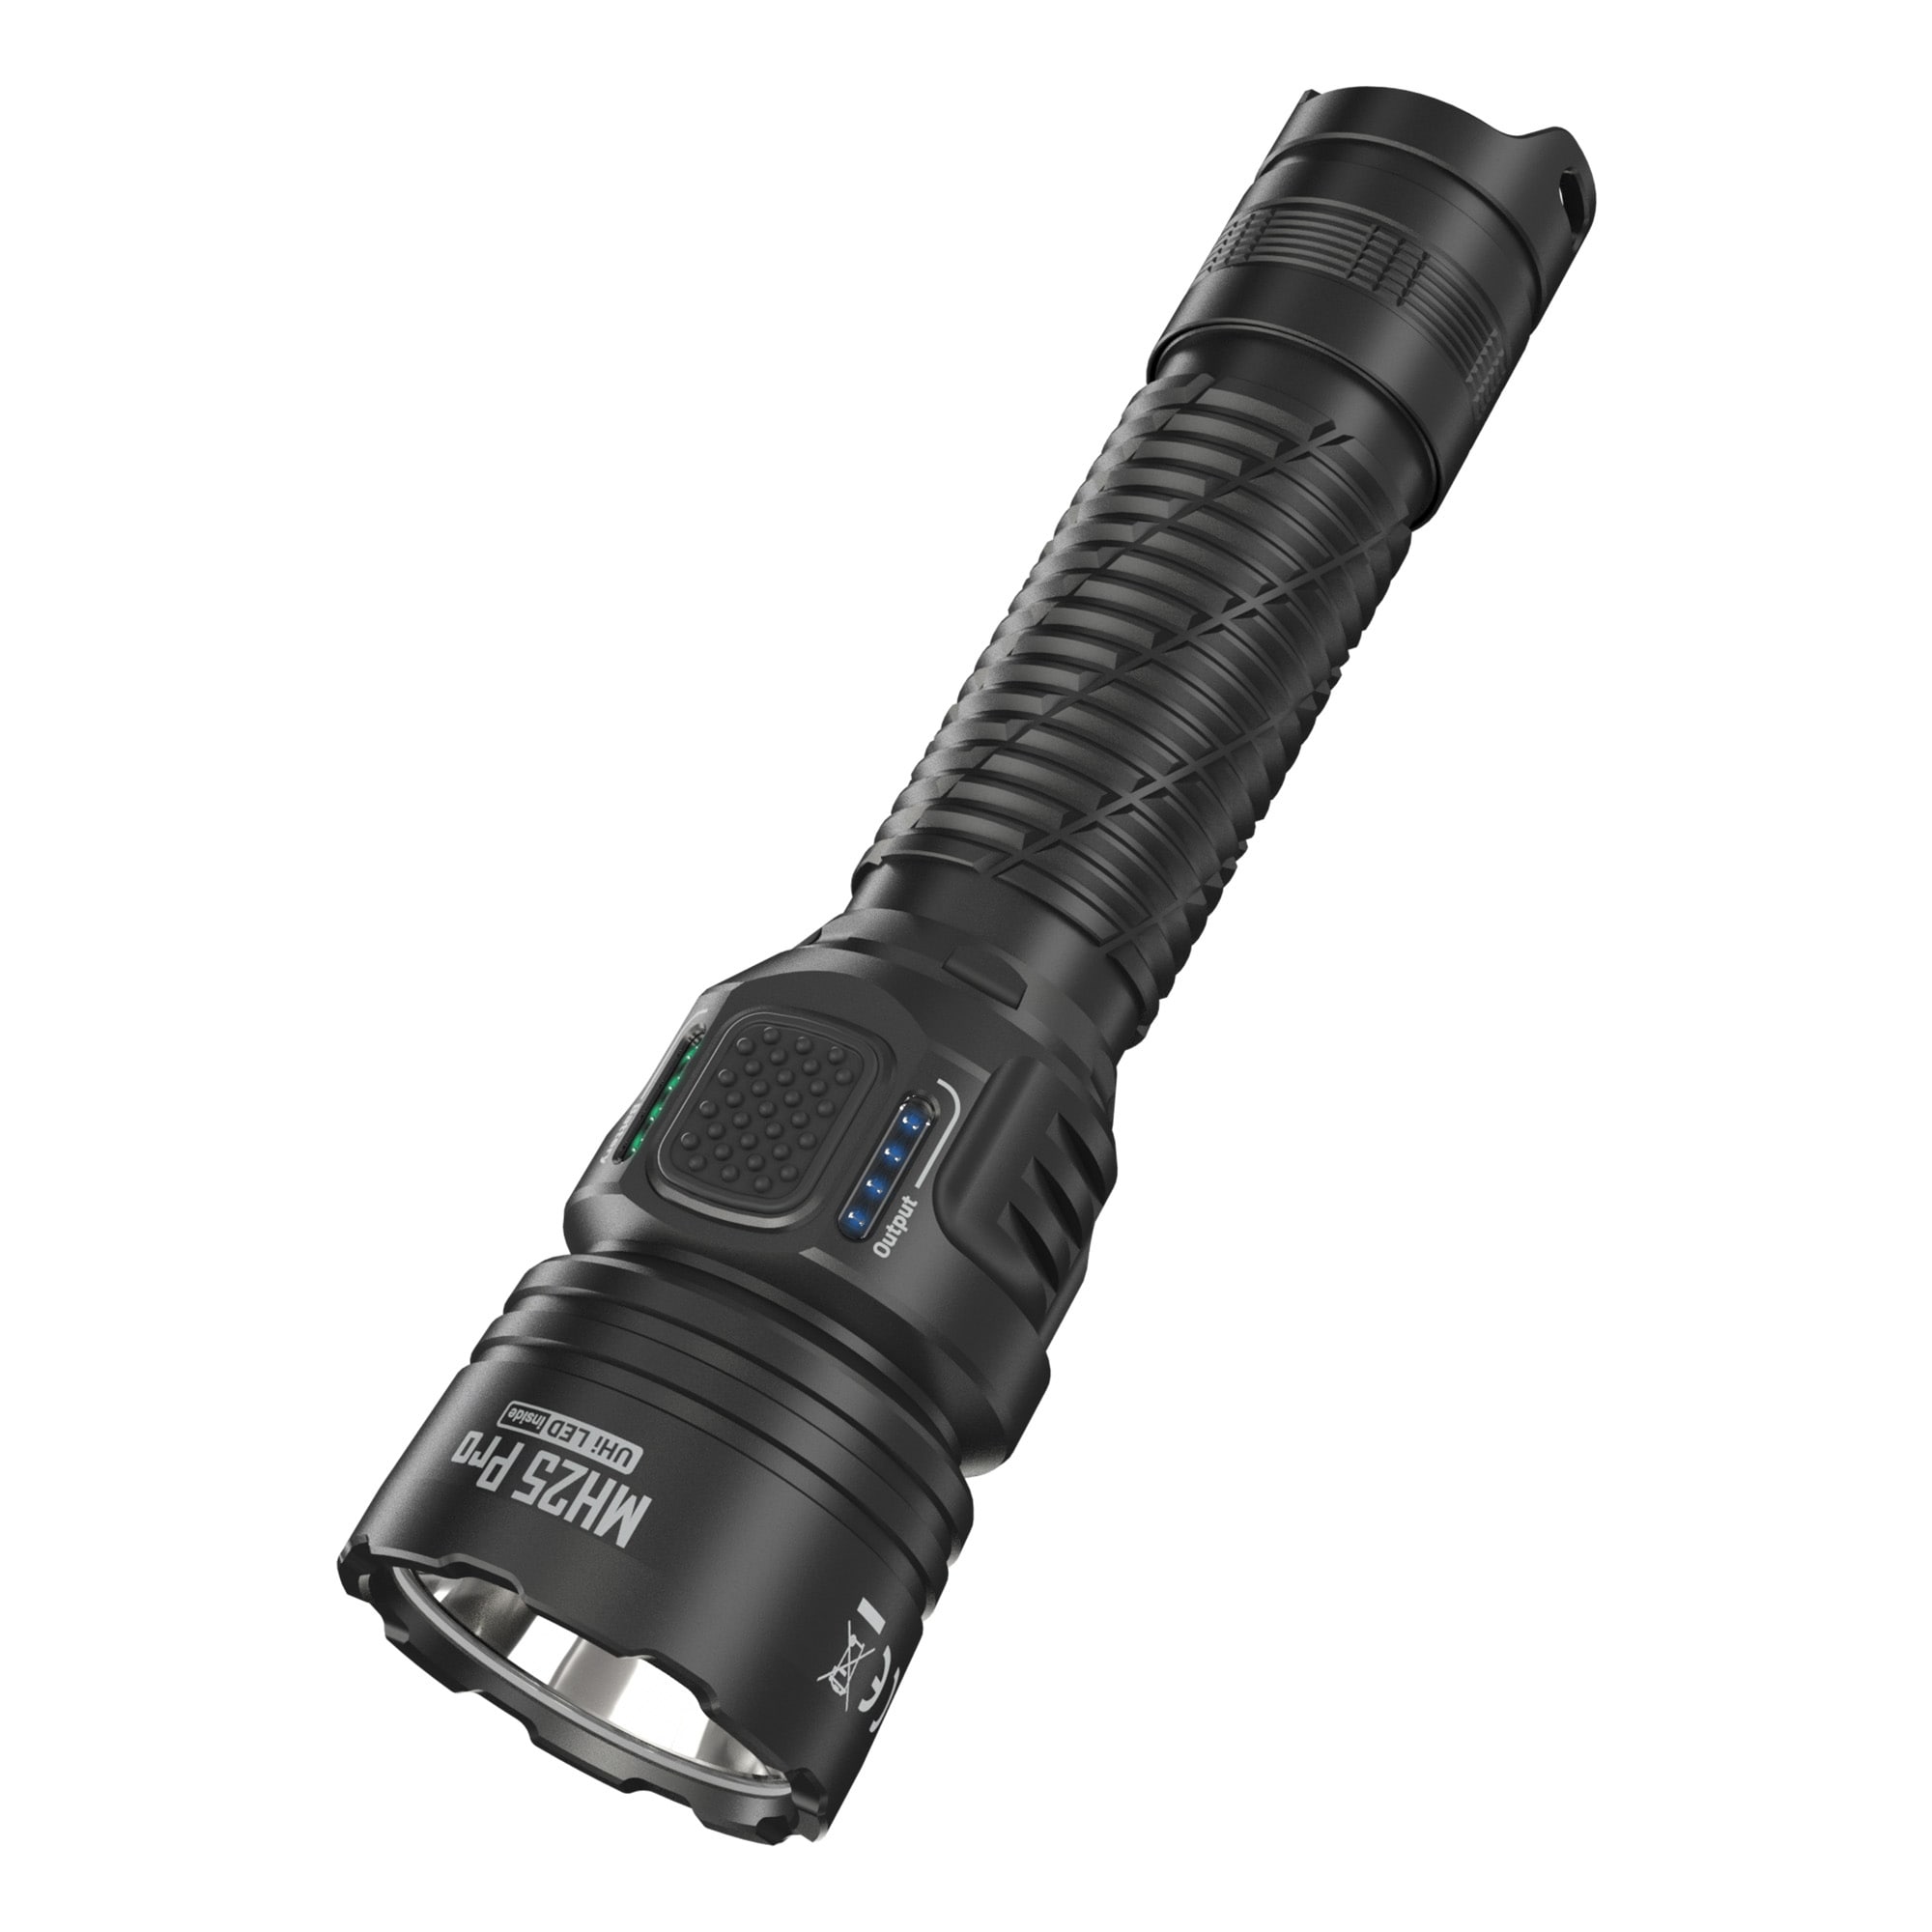 https://ak1.ostkcdn.com/images/products/is/images/direct/273b2c9f43609ccfc72bea73fb9bc4df86638250/Nitecore-MH25-Pro-3300-Lumen-Long-Throw-Rechargeable-Flashlight.jpg